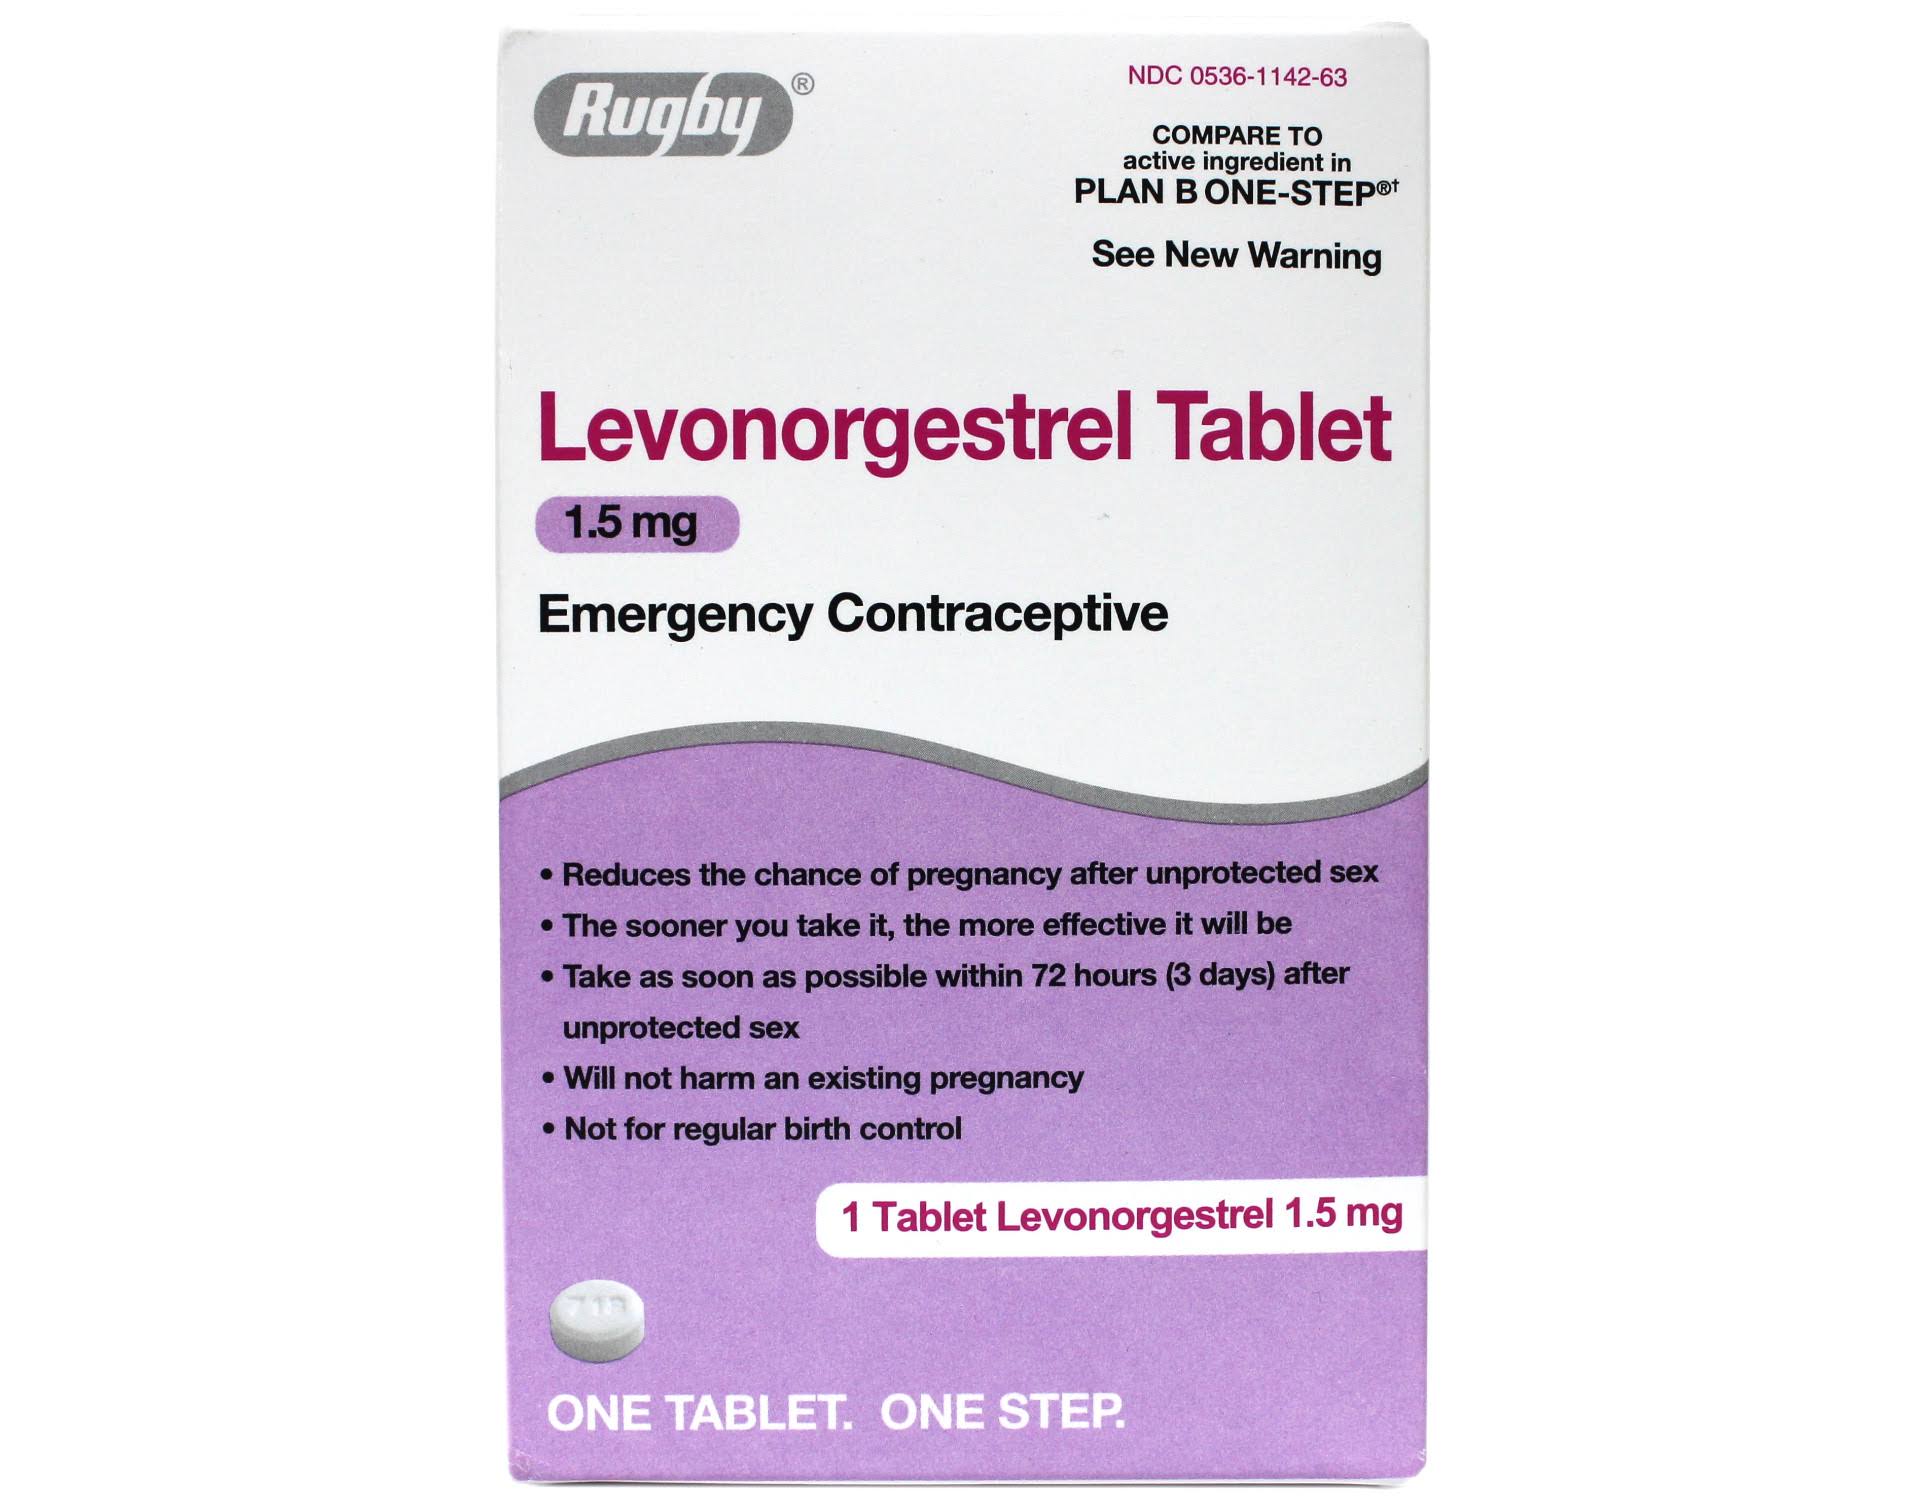 Rugby Levonorgestrel Tablet 1.5 mg Emergency Contraceptive 1 Tablet